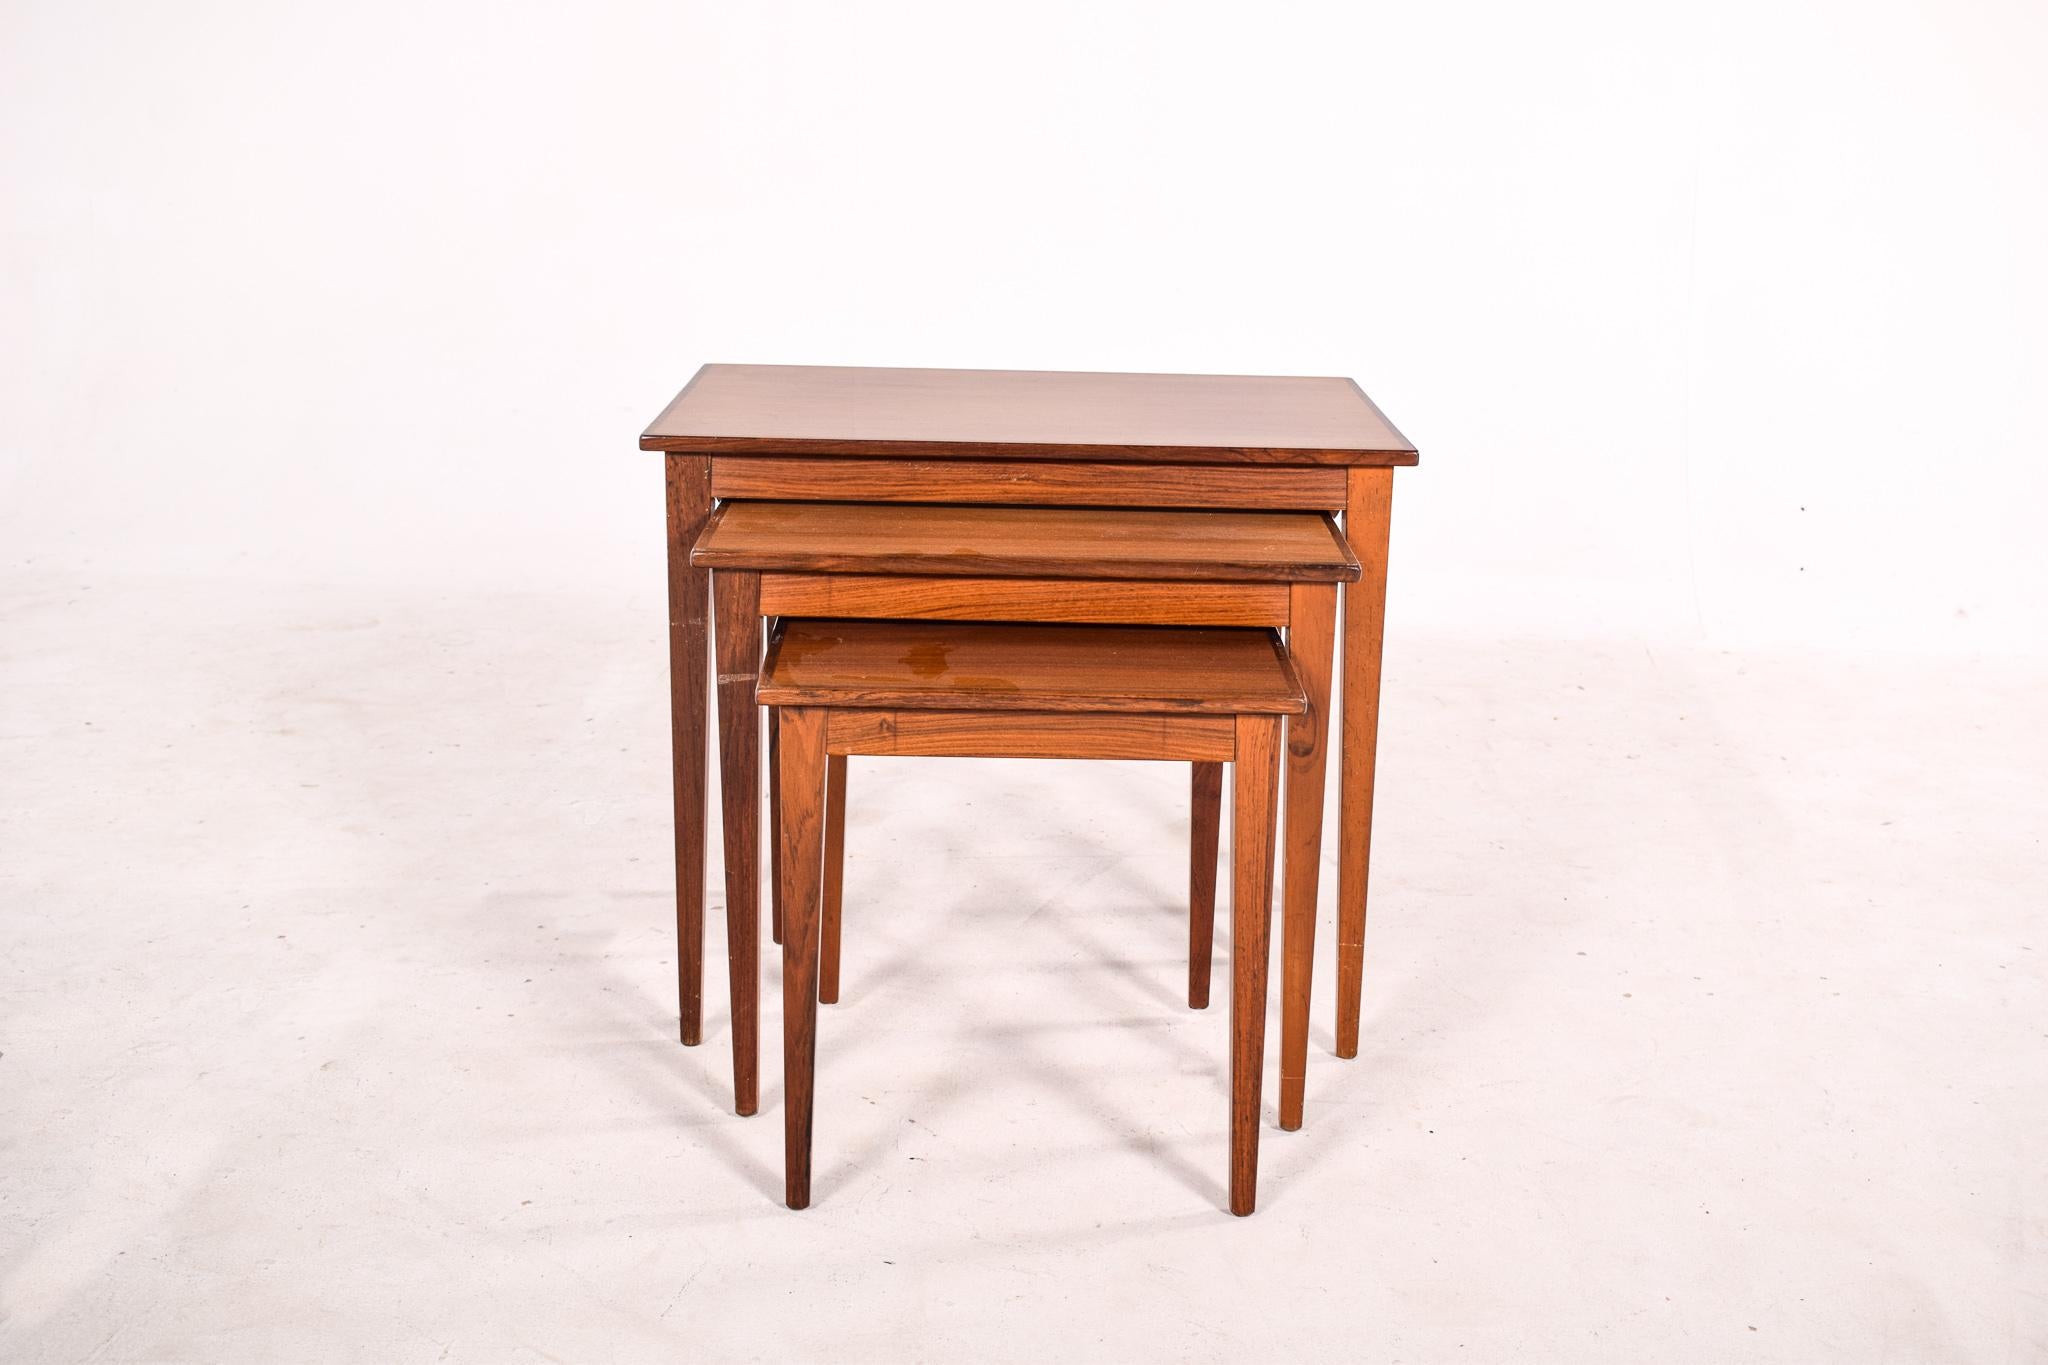 Set of three Danish nesting tables, made of rosewood. Table design has square, slightly recessed legs, and a tabletop beautifully edged with contrasting wood grain. A set of concealed, parallel runners allows each smaller table to slide easily under